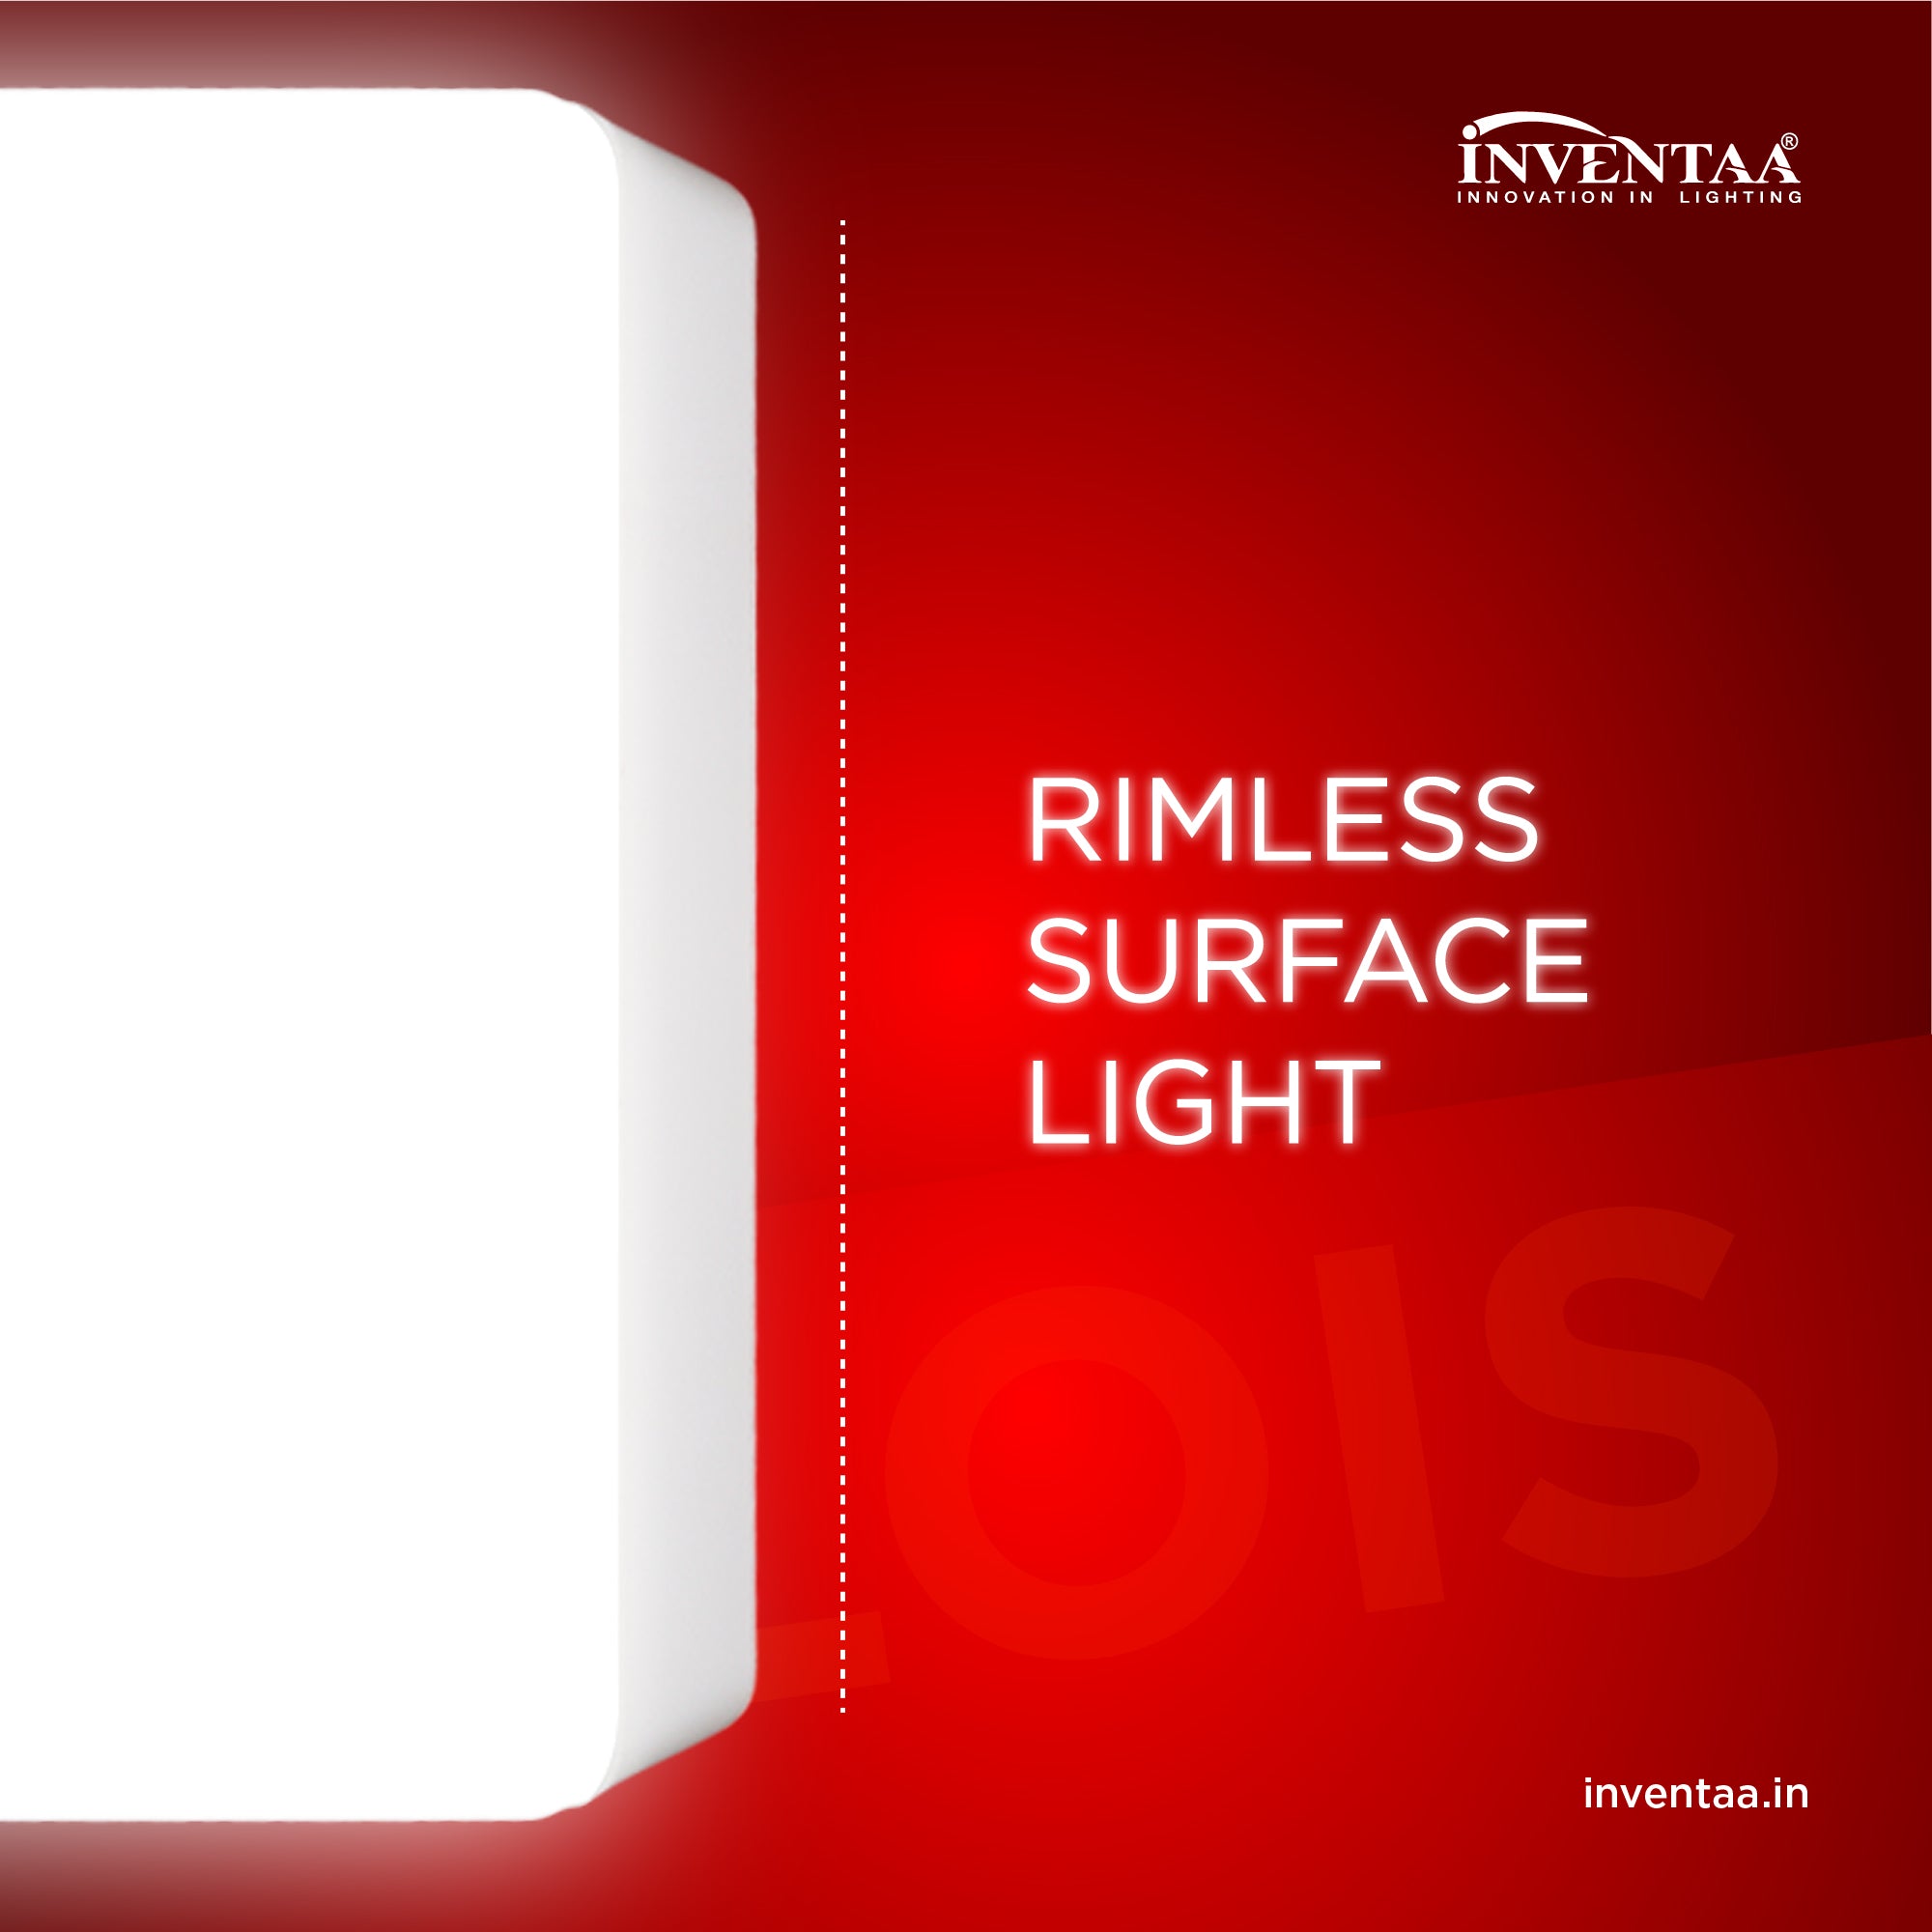   Lois Square 8W LED Surface Light  Featuring Its Rimlesss Design #watts_8w